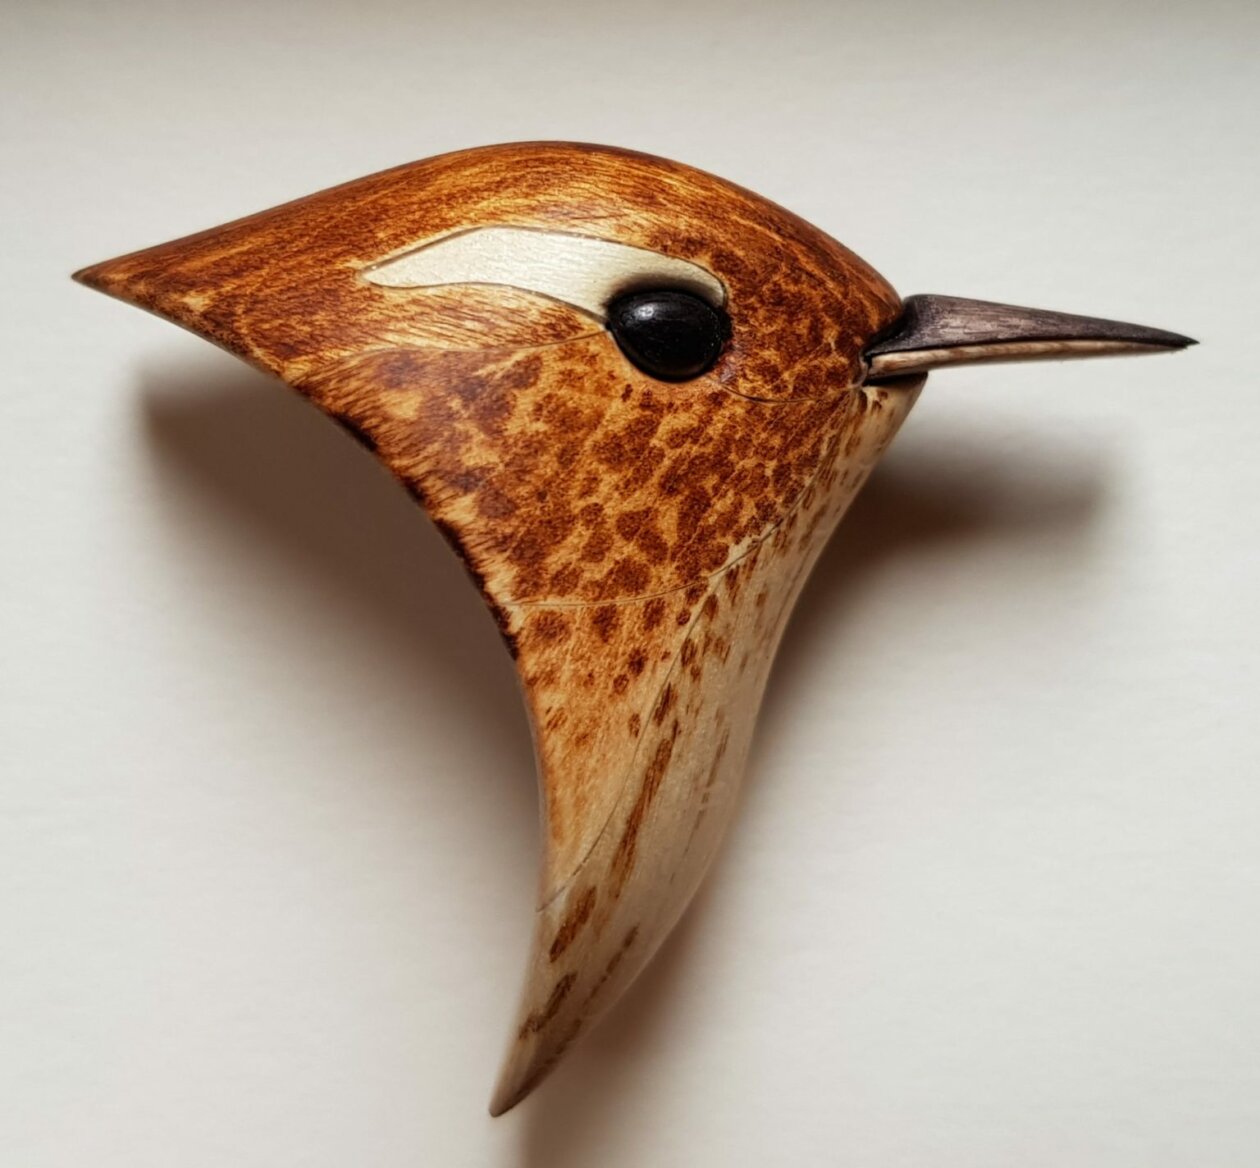 Realistic Wood Sculptures Of Bird Busts And Feathers By T.a.g. Smith (7)